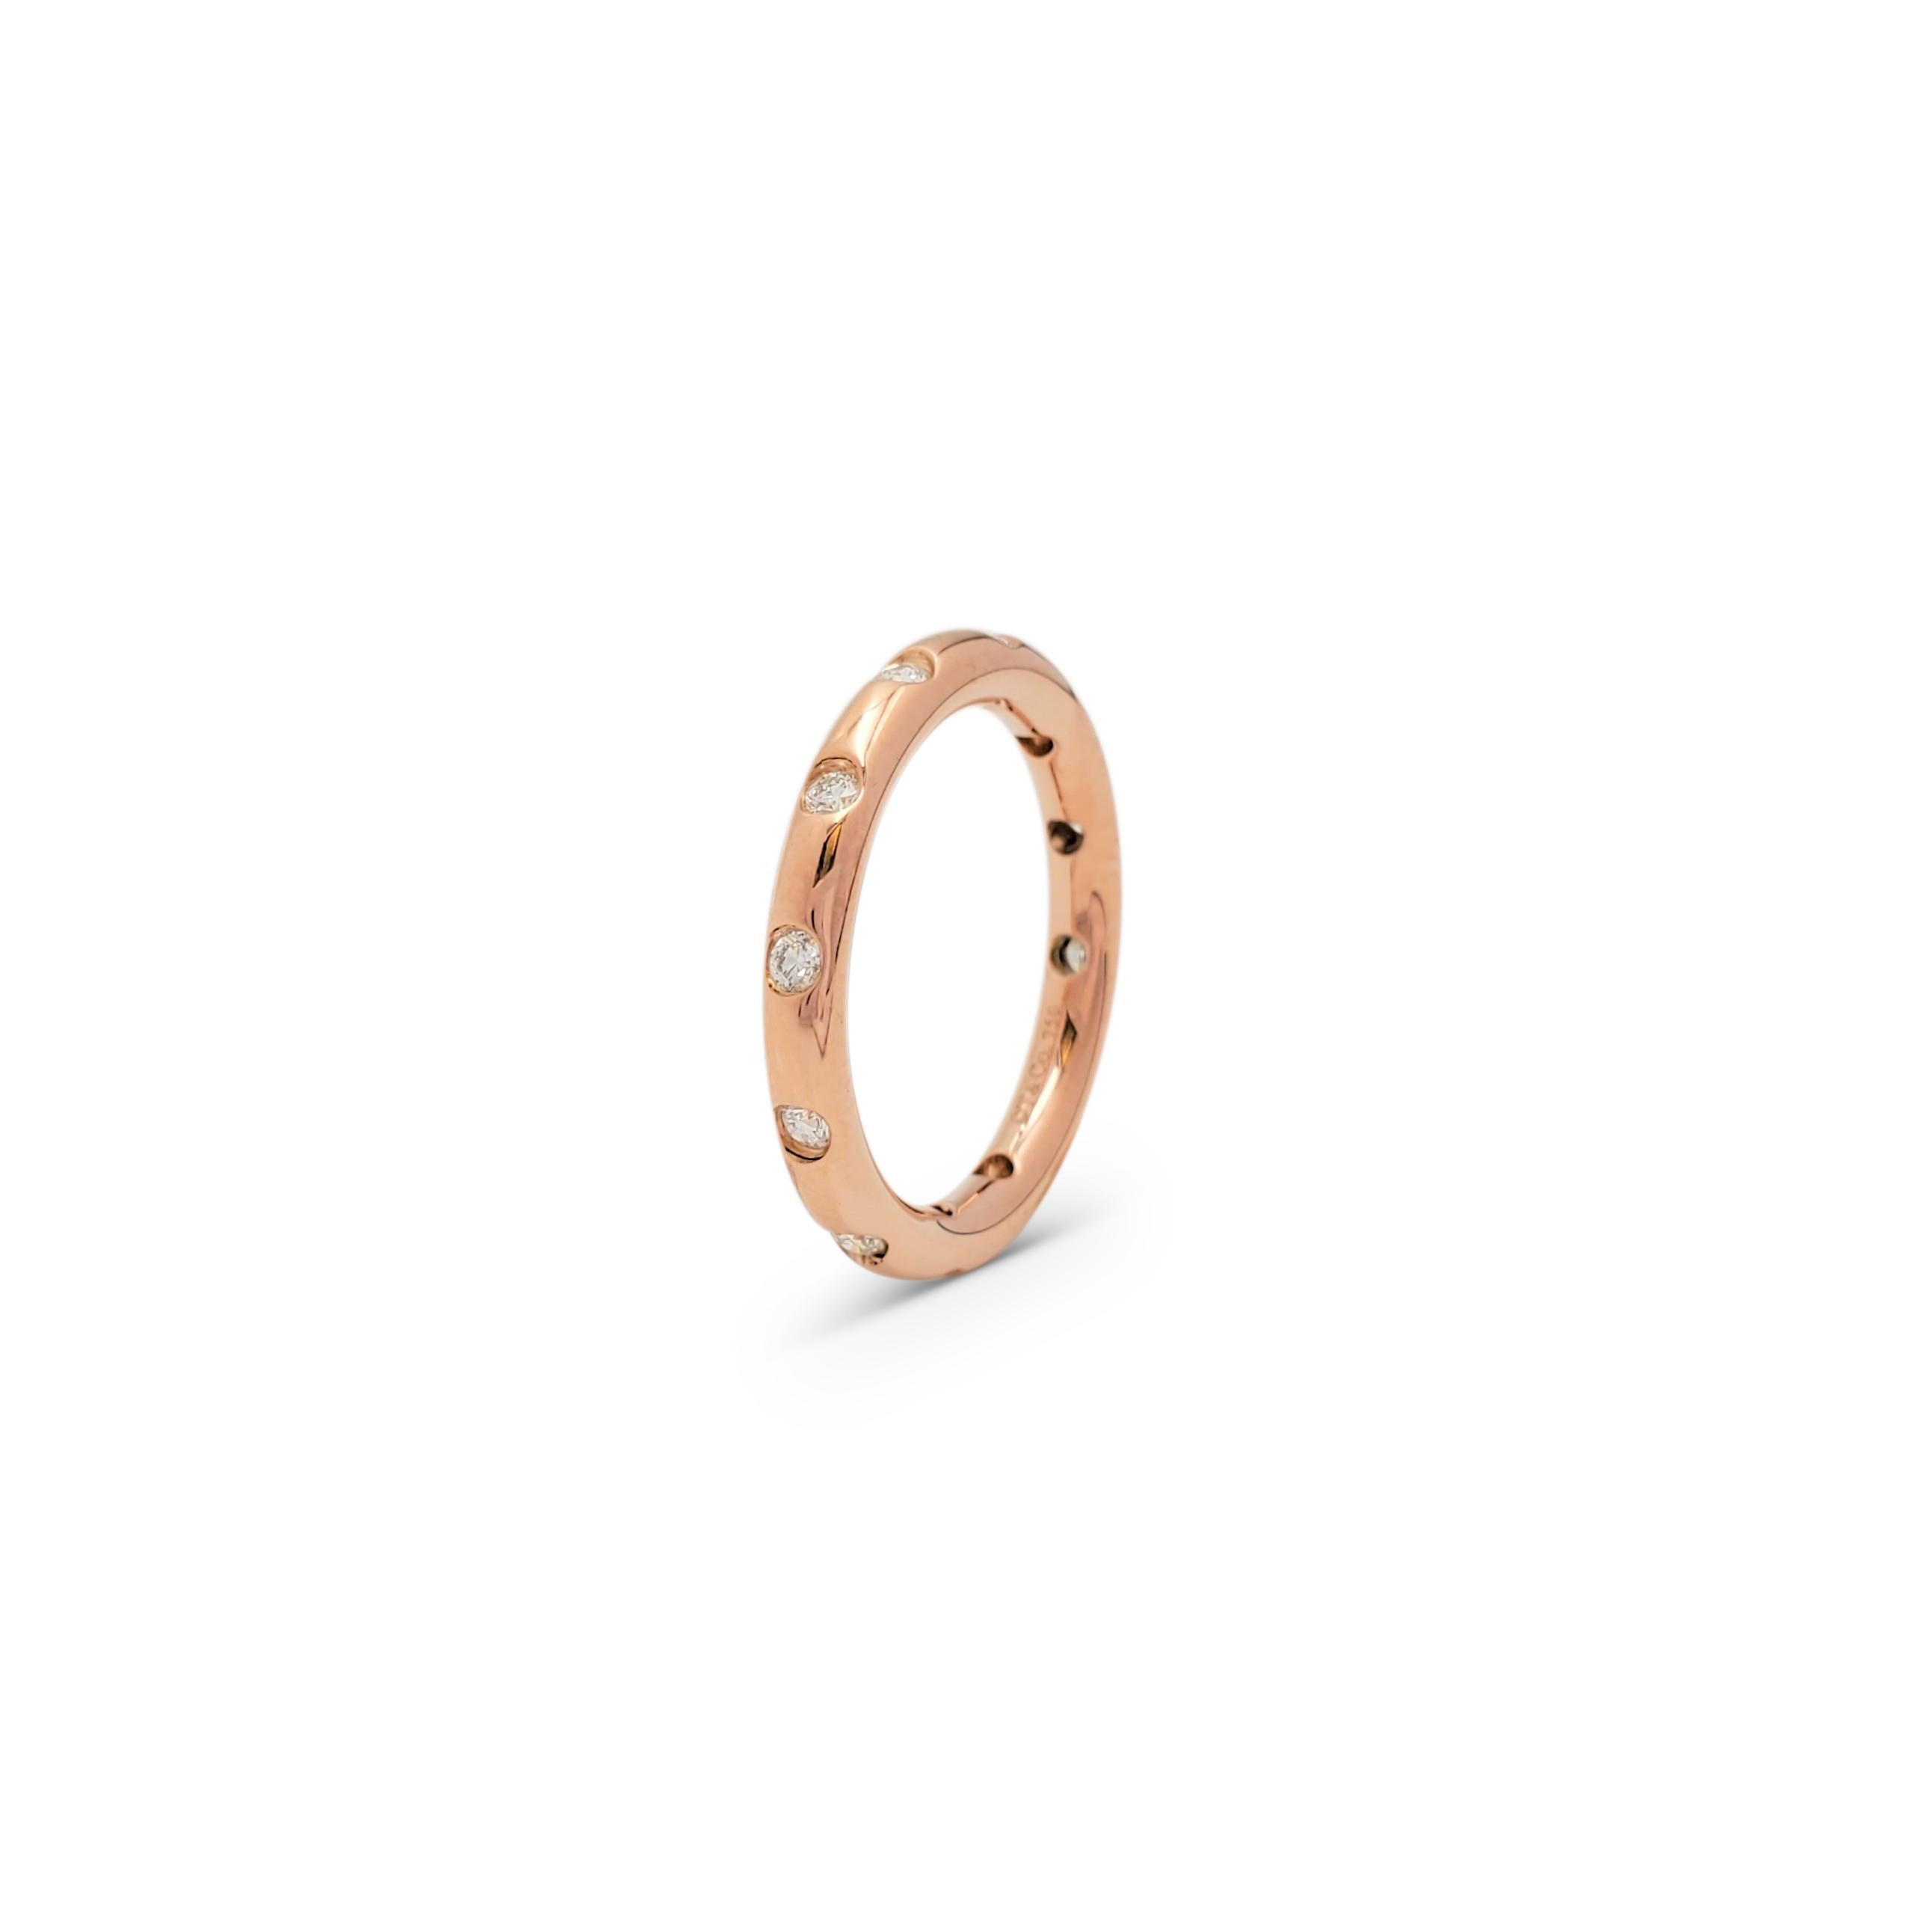 Authentic Tiffany & Co. stacking band ring crafted in 18 karat rose gold is bezel set with an estimated 0.13 carats of round brilliant cut diamonds (E-F, VS). Ring size 5. Signed T&Co., 750. The ring presented with the original pouch, no box or